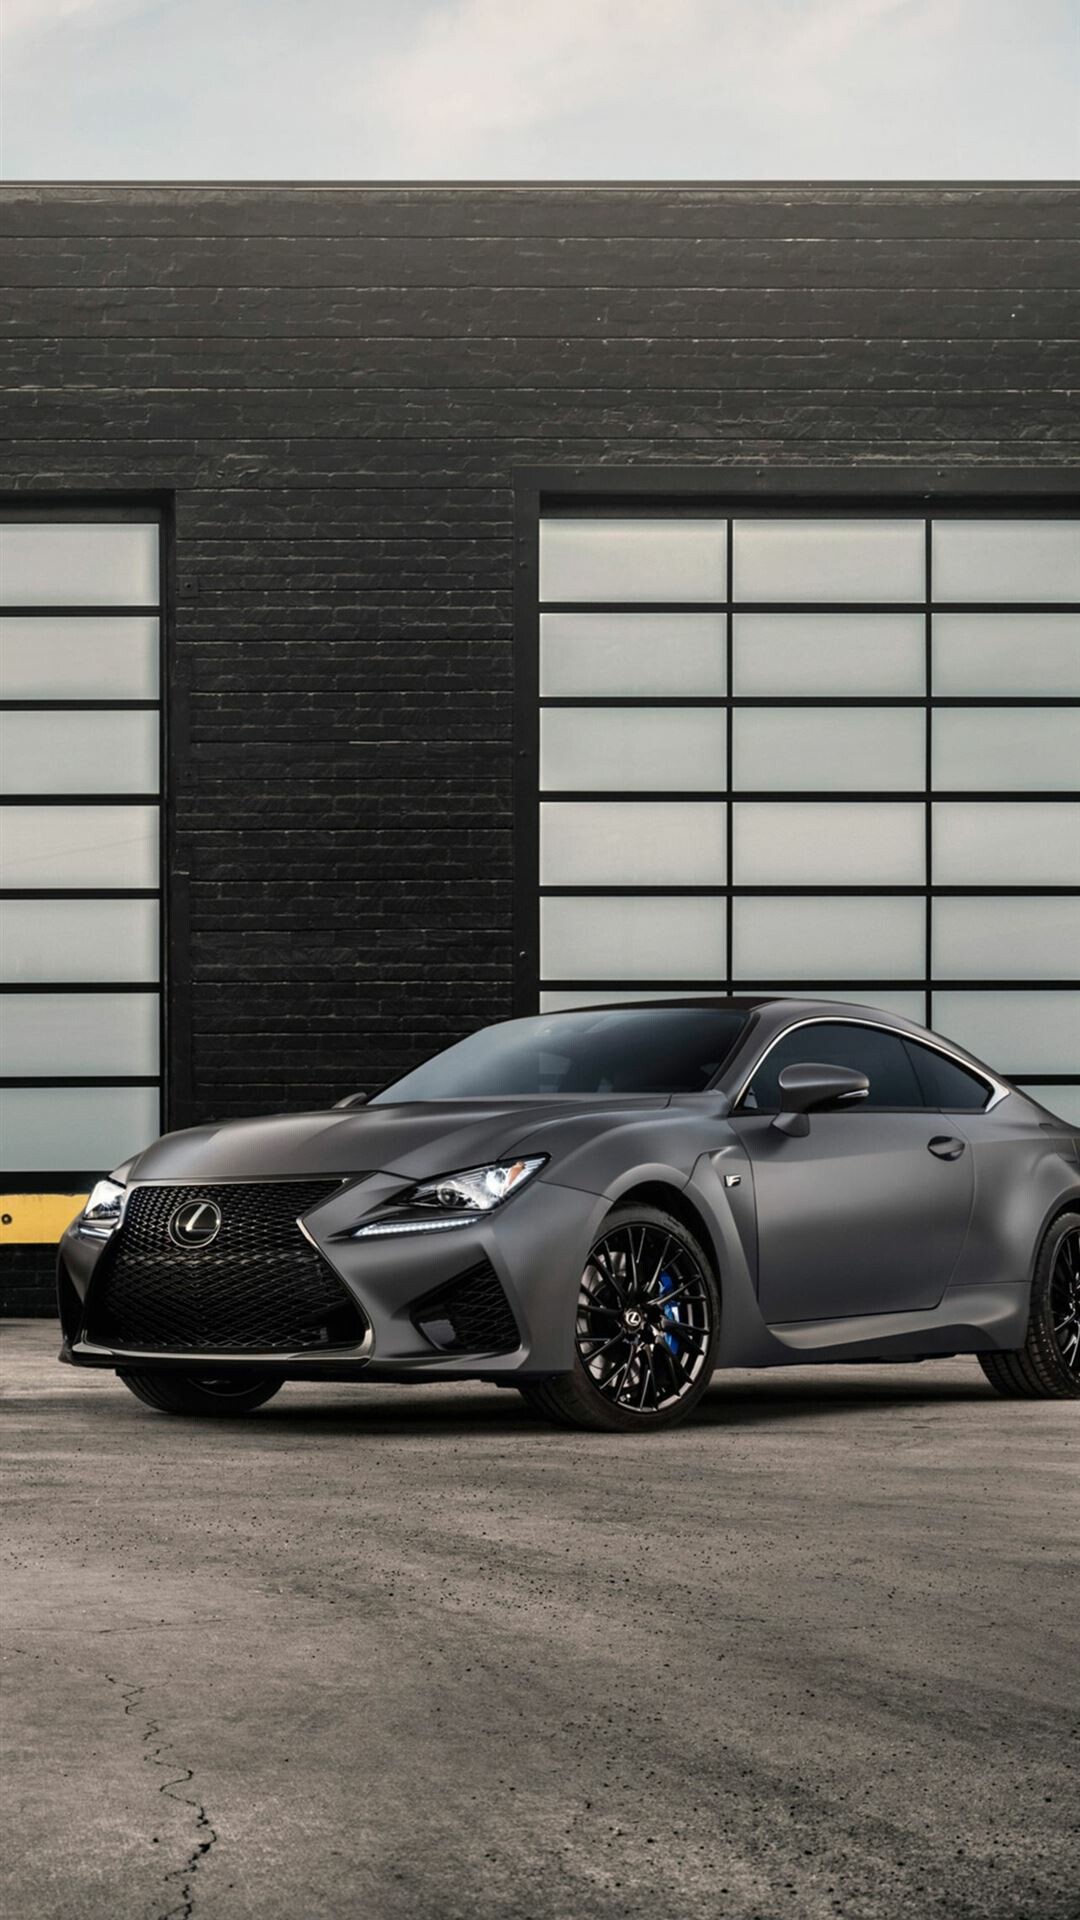 Lexus: A compact executive two-door coupe manufactured by Toyota's luxury division, RC. 1080x1920 Full HD Wallpaper.